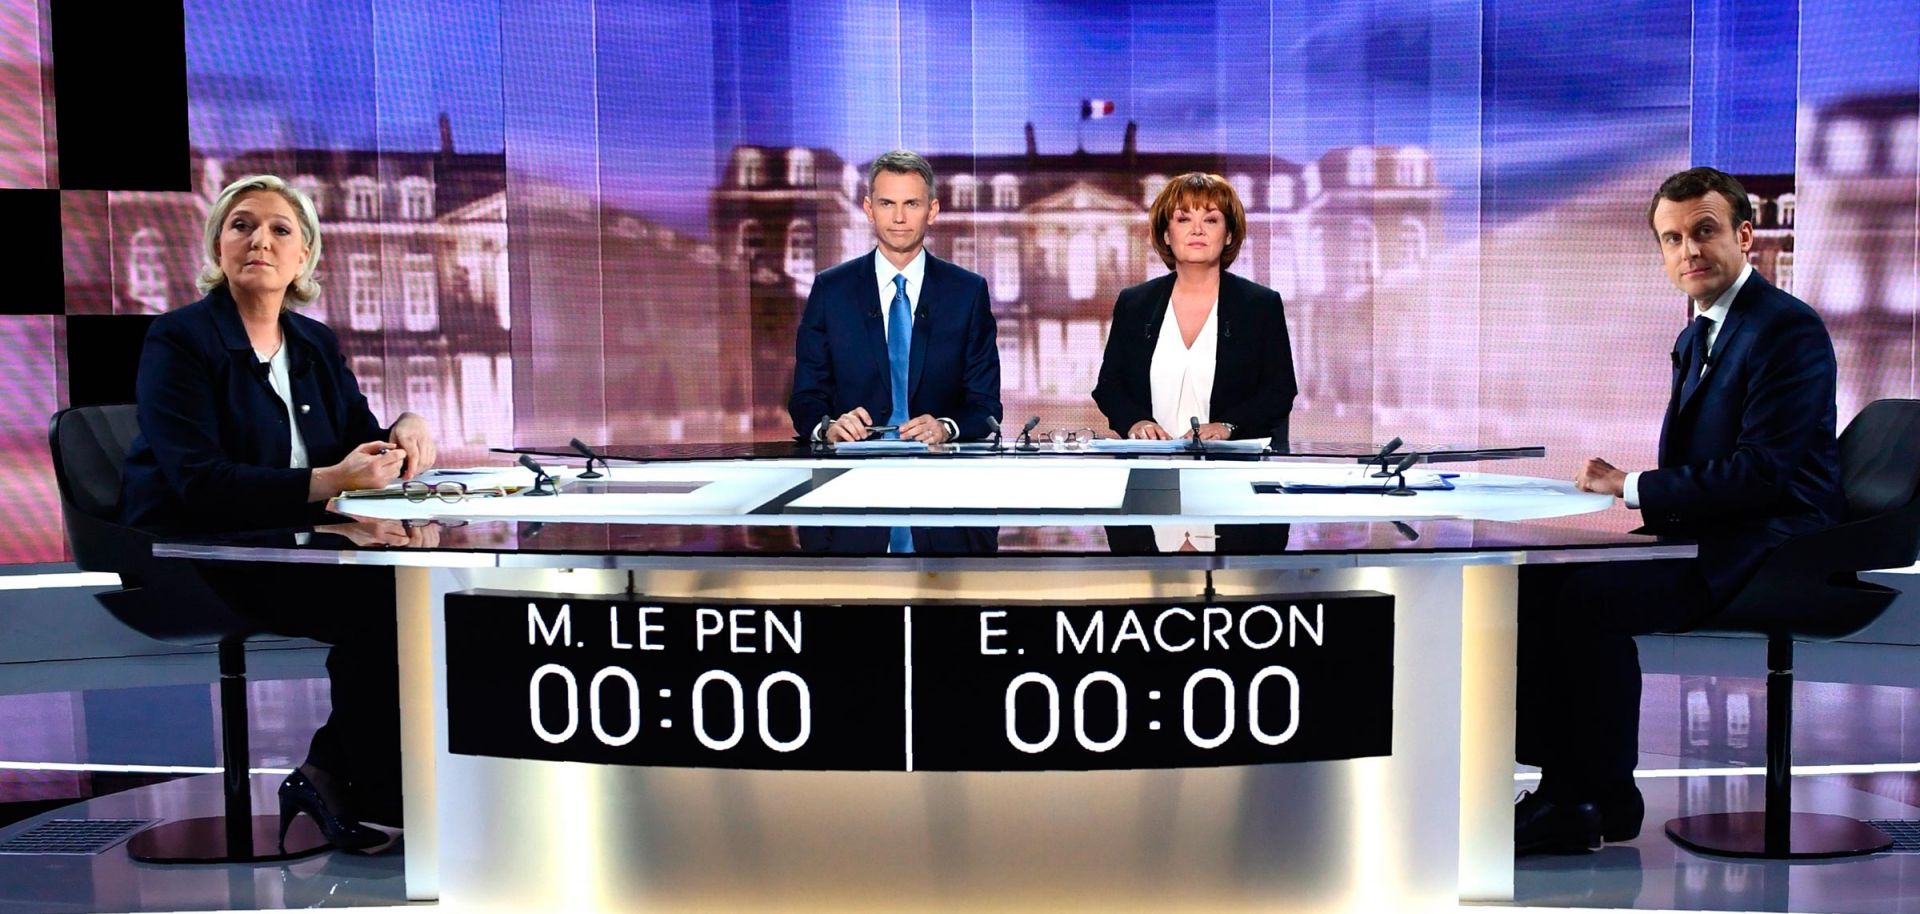 French presidential election candidate Marine Le Pen (L) faces off against Emmanuel Macron. Voters go to the polls on Sunday to determine who will hold one of the most powerful democratically elected positions in the world.